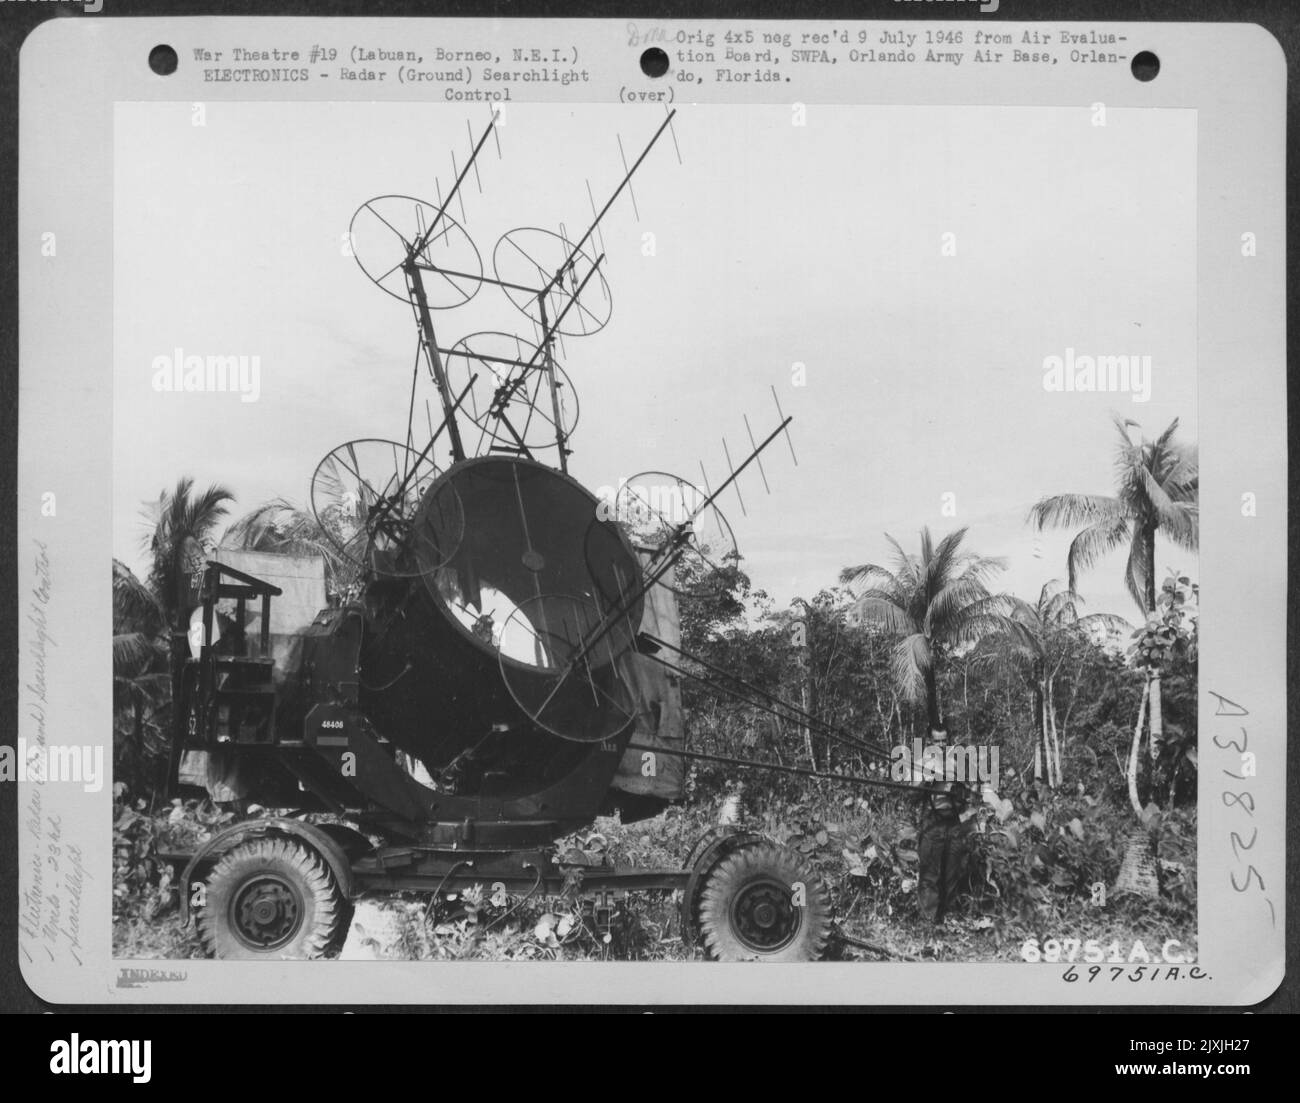 This Radar Searchlight Of The 23Rd Anti-Aircraft Searchlight Battalion Is The Lead Light; It Quickly Spots The Plane And Other Searchlights Then 'Pick Up' The Plane In A 'Cross Fire'. Labuan, Borneo, Netherland East Indies, 17 June 1945. Stock Photo